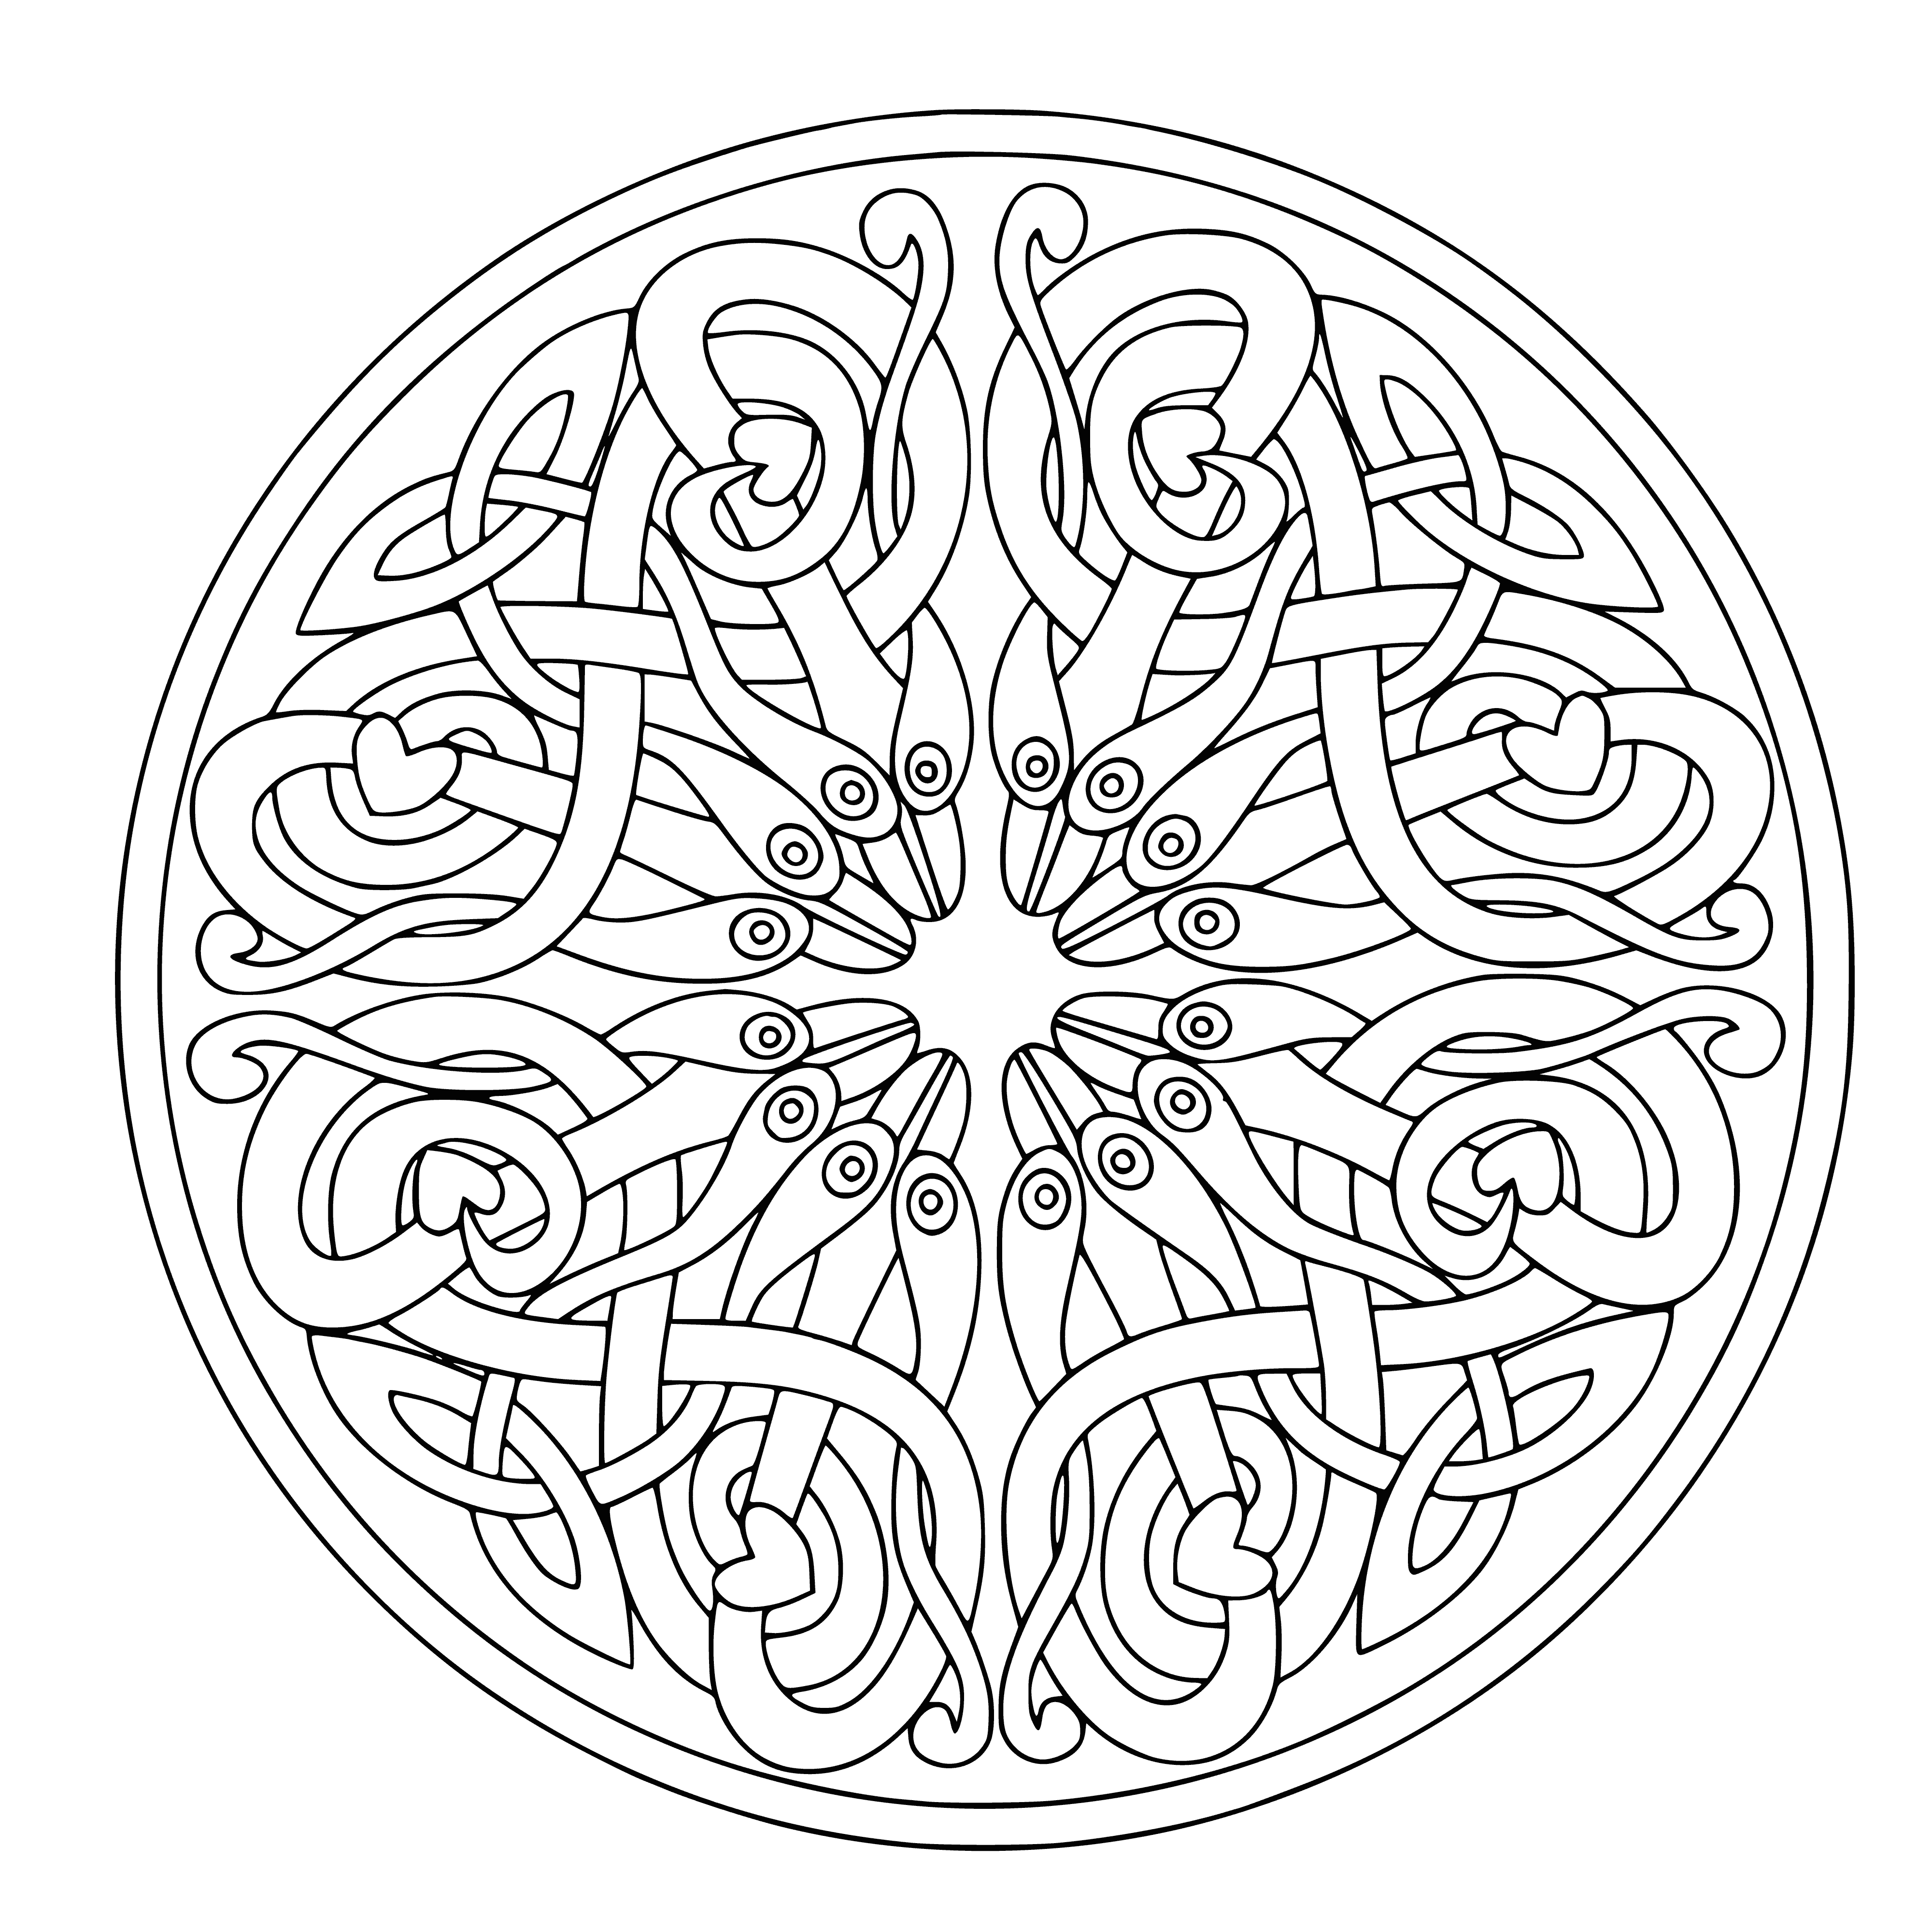 coloring page: A mandala is a spiritual symbol representing the universe, often seen in Hinduism/Buddhism and in diagrams, charts and geometric patterns.